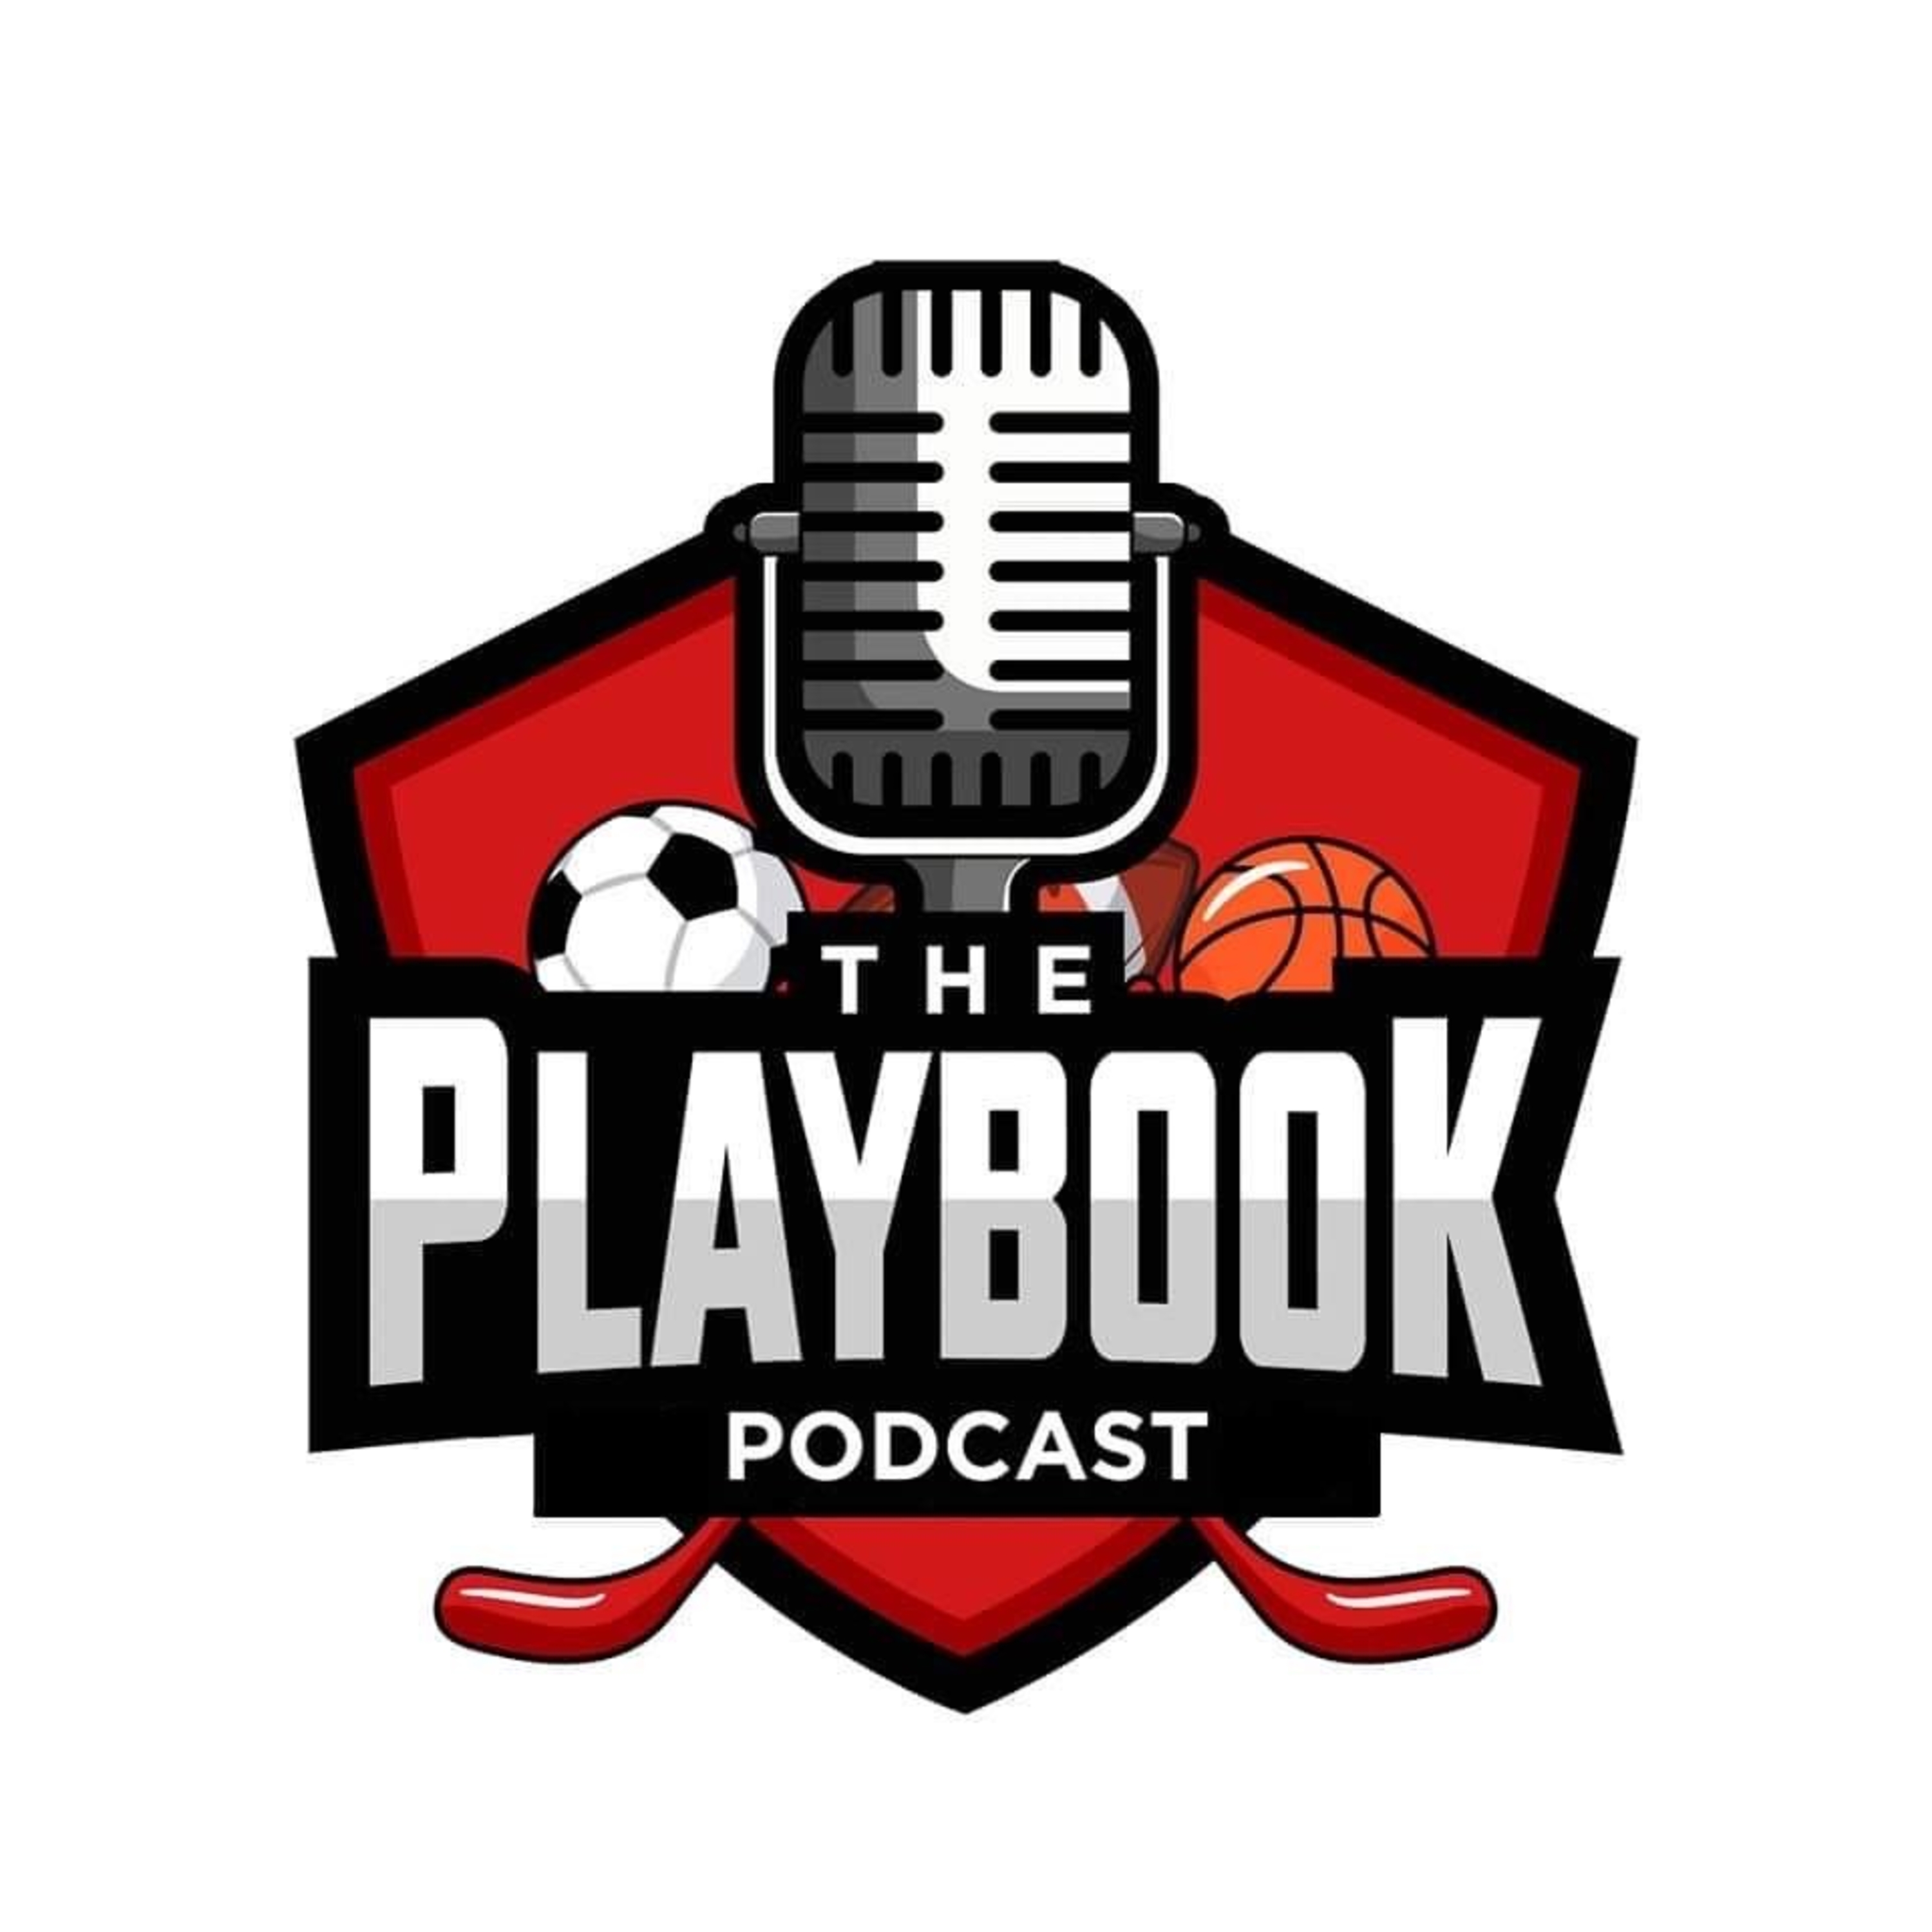 Artwork for podcast The Playbook Podcast